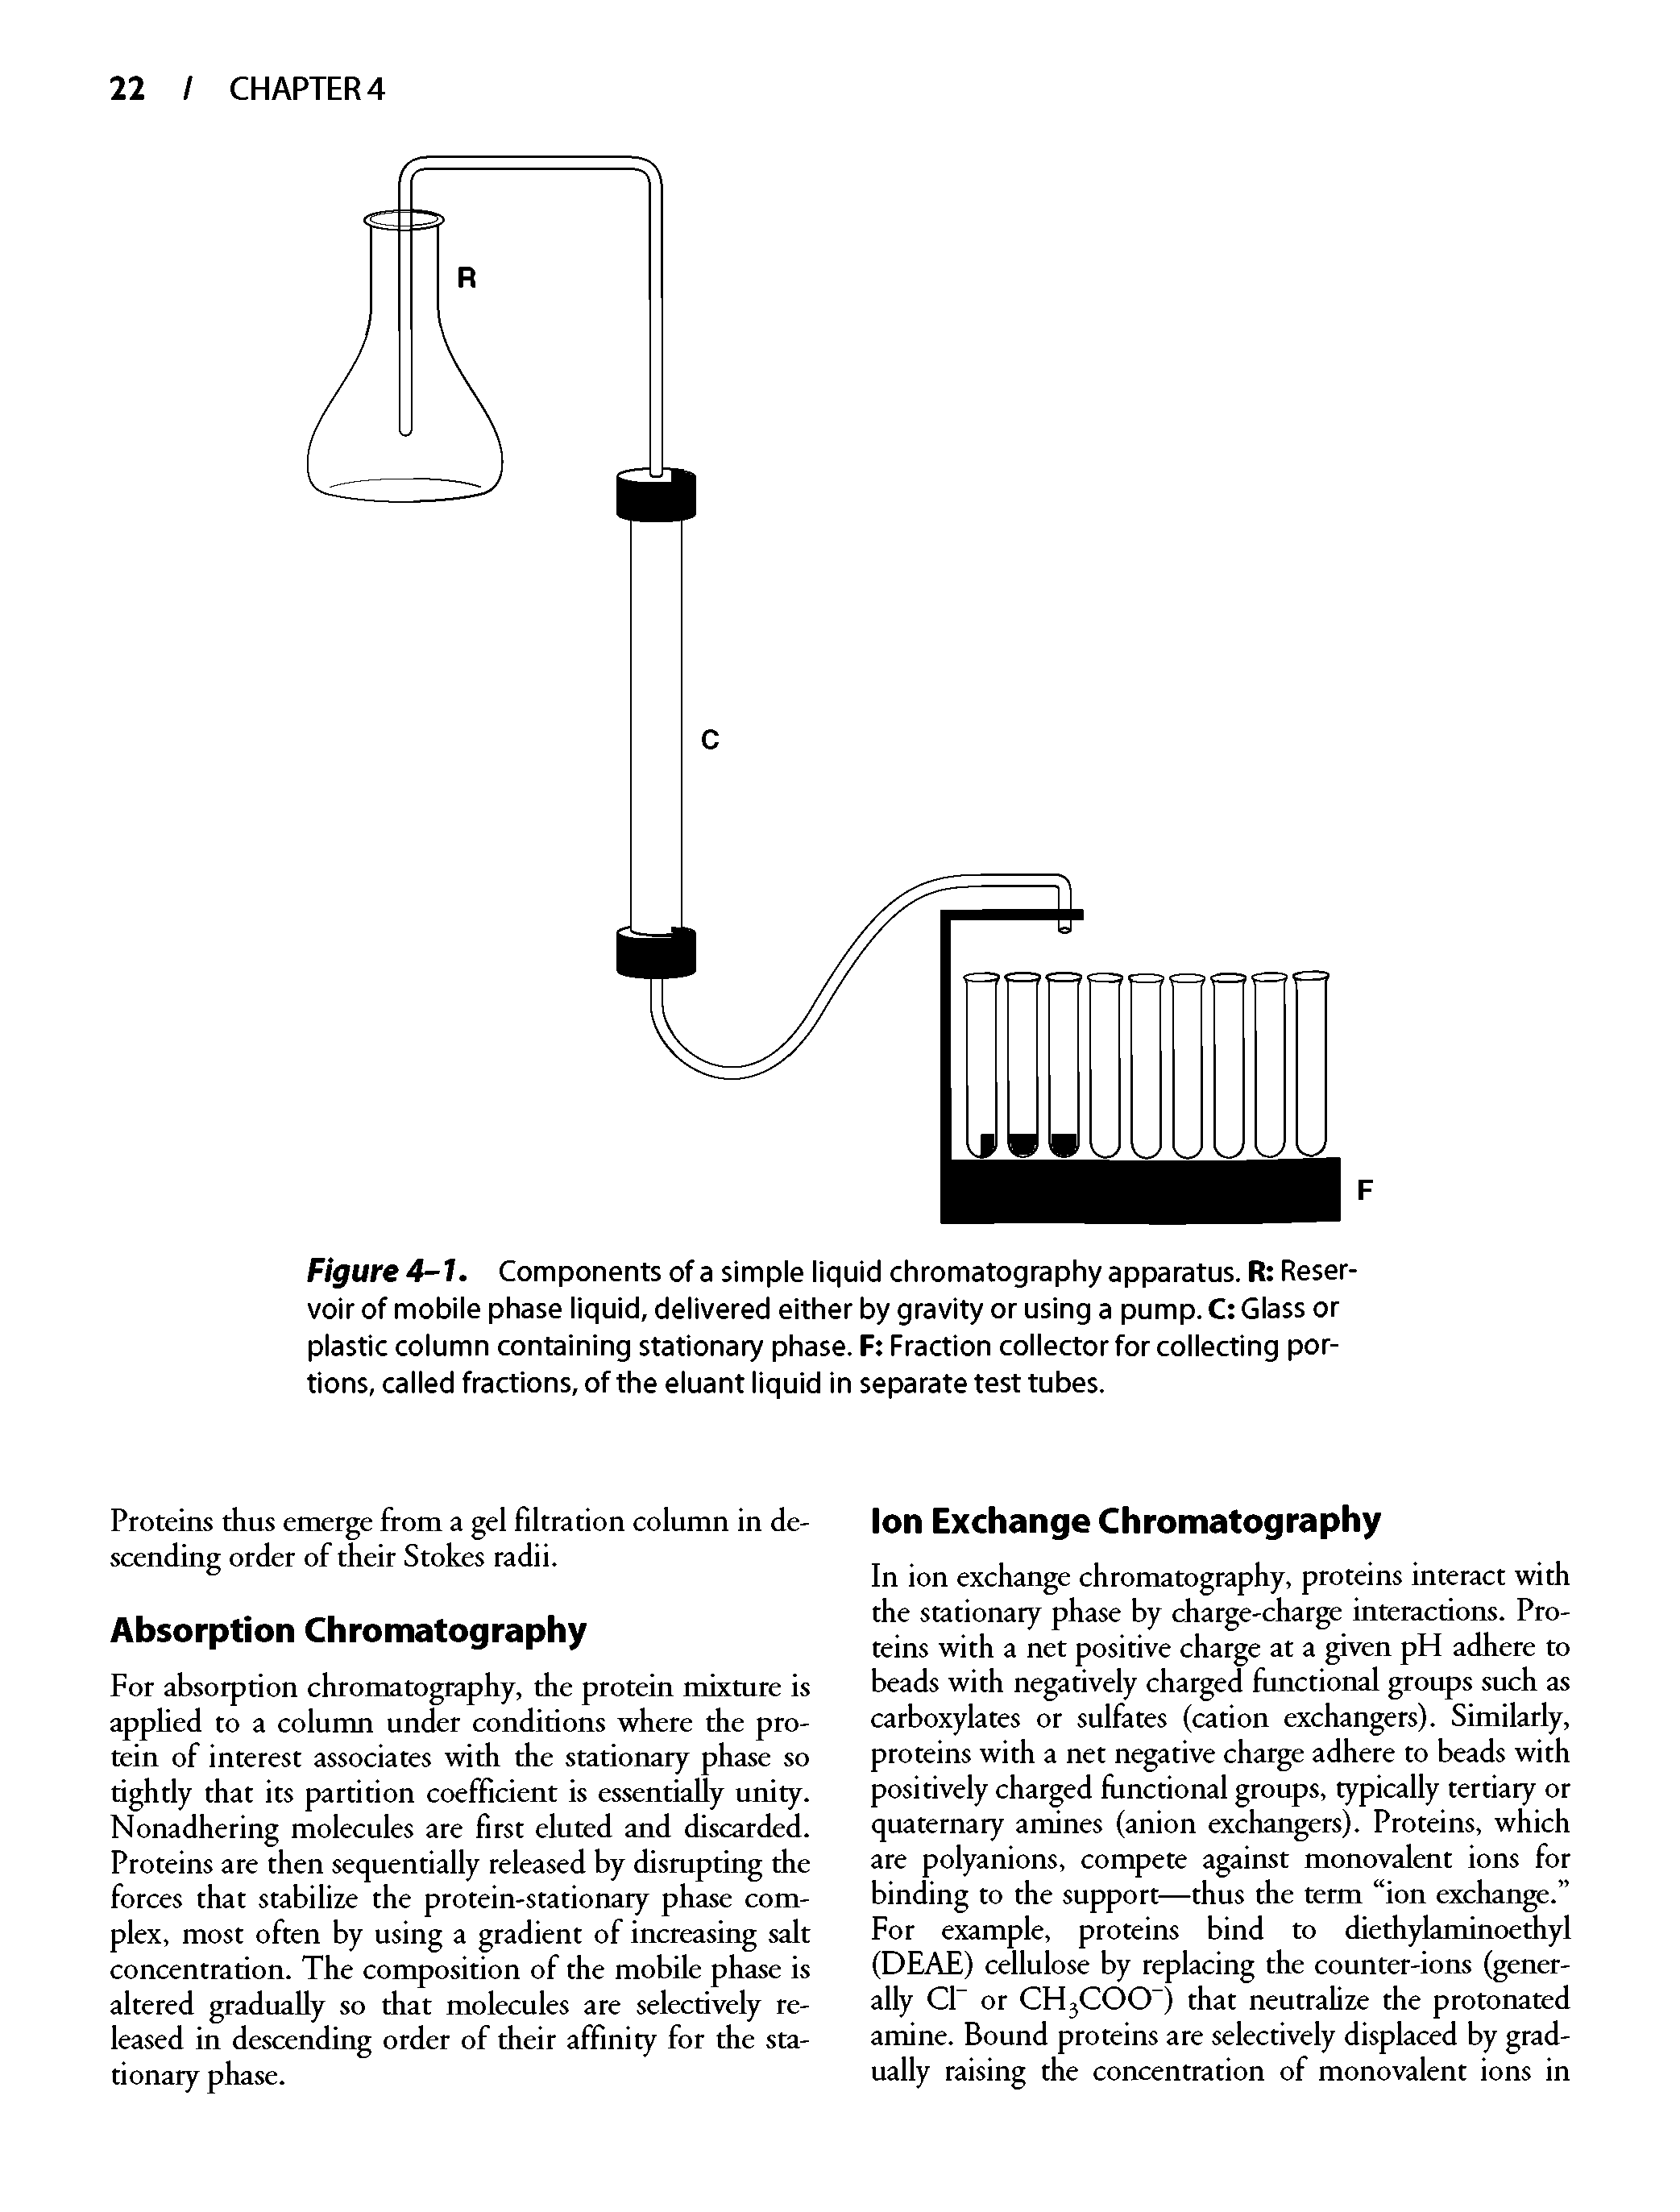 Figure 4-1. Components of a simple liquid chromatography apparatus. R Reservoir of mobile phase liquid, delivered either by gravity or using a pump. C Glass or plastic column containing stationary phase. F Fraction collector for collecting portions, called fractions, of the eluant liquid in separate test tubes.